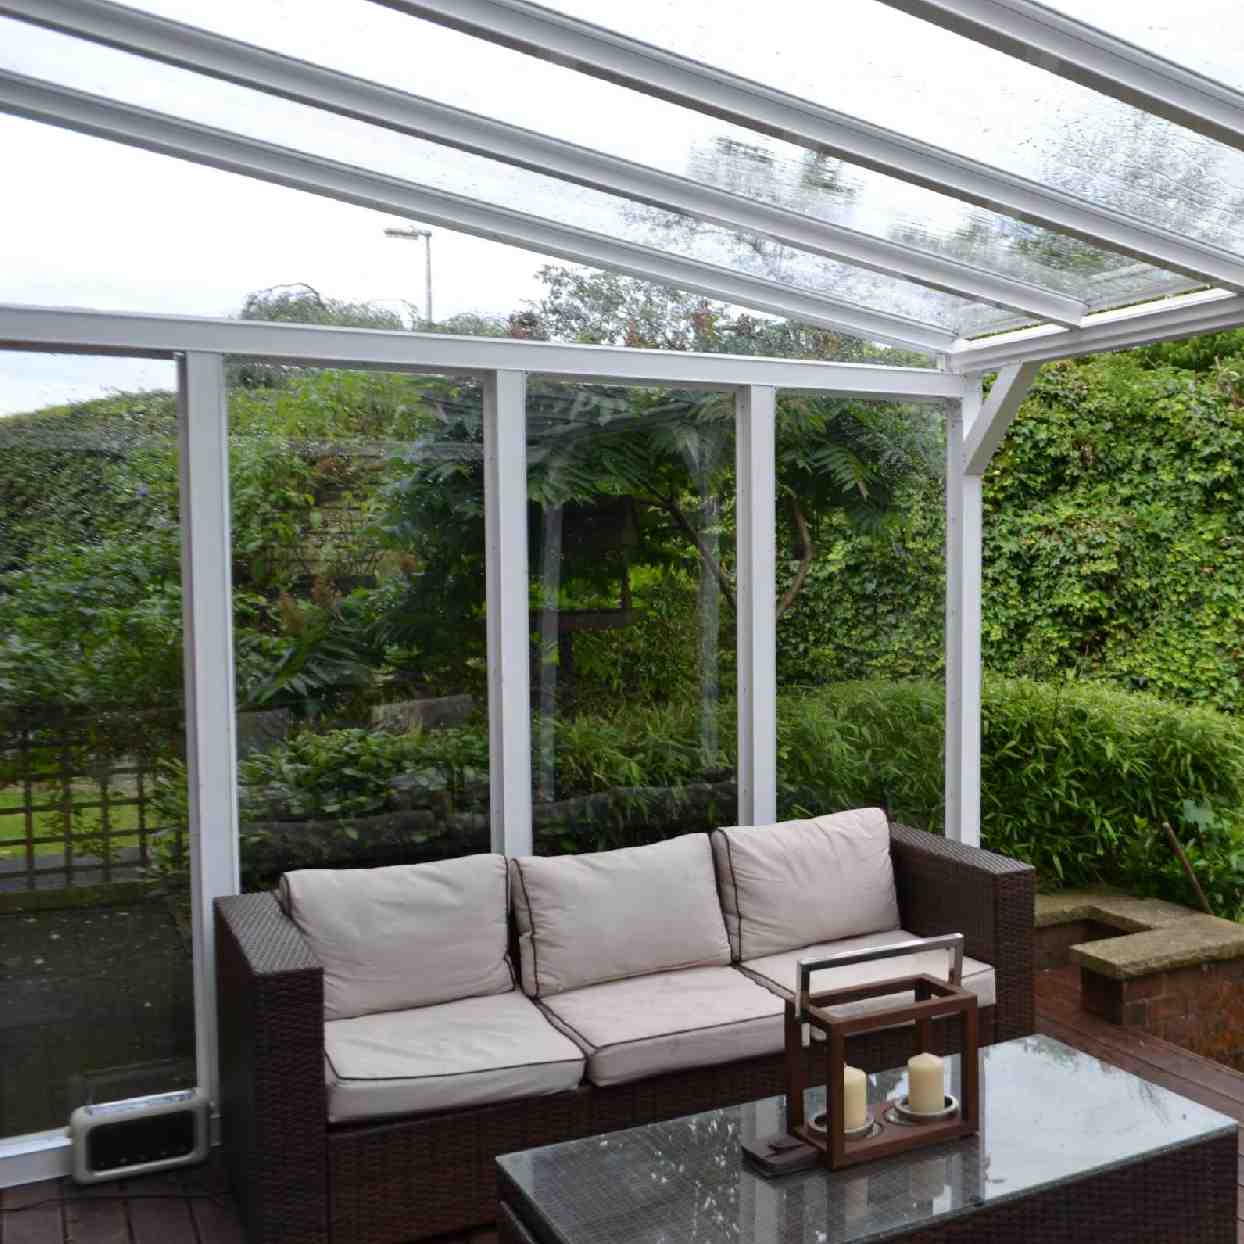 Buy Omega Verandah White with 6mm Glass Clear Plate Polycarbonate Glazing - 7.0m (W) x 3.0m (P), (4) Supporting Posts online today